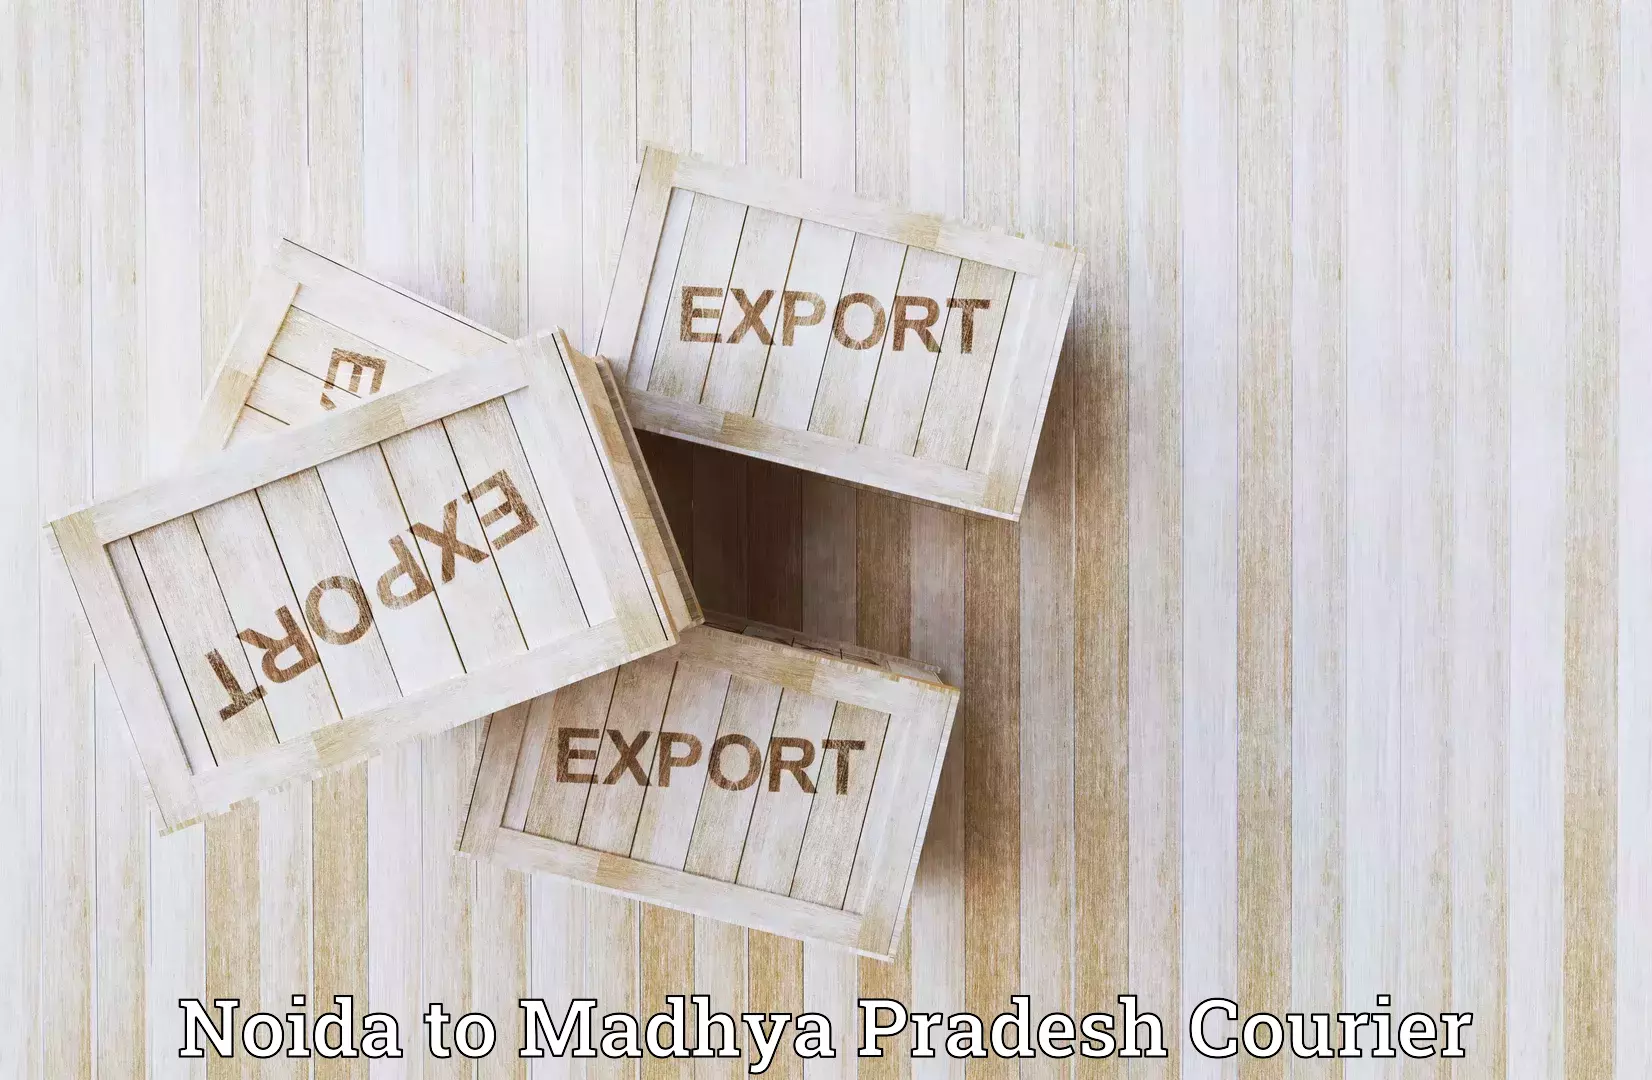 Efficient courier operations Noida to Garoth